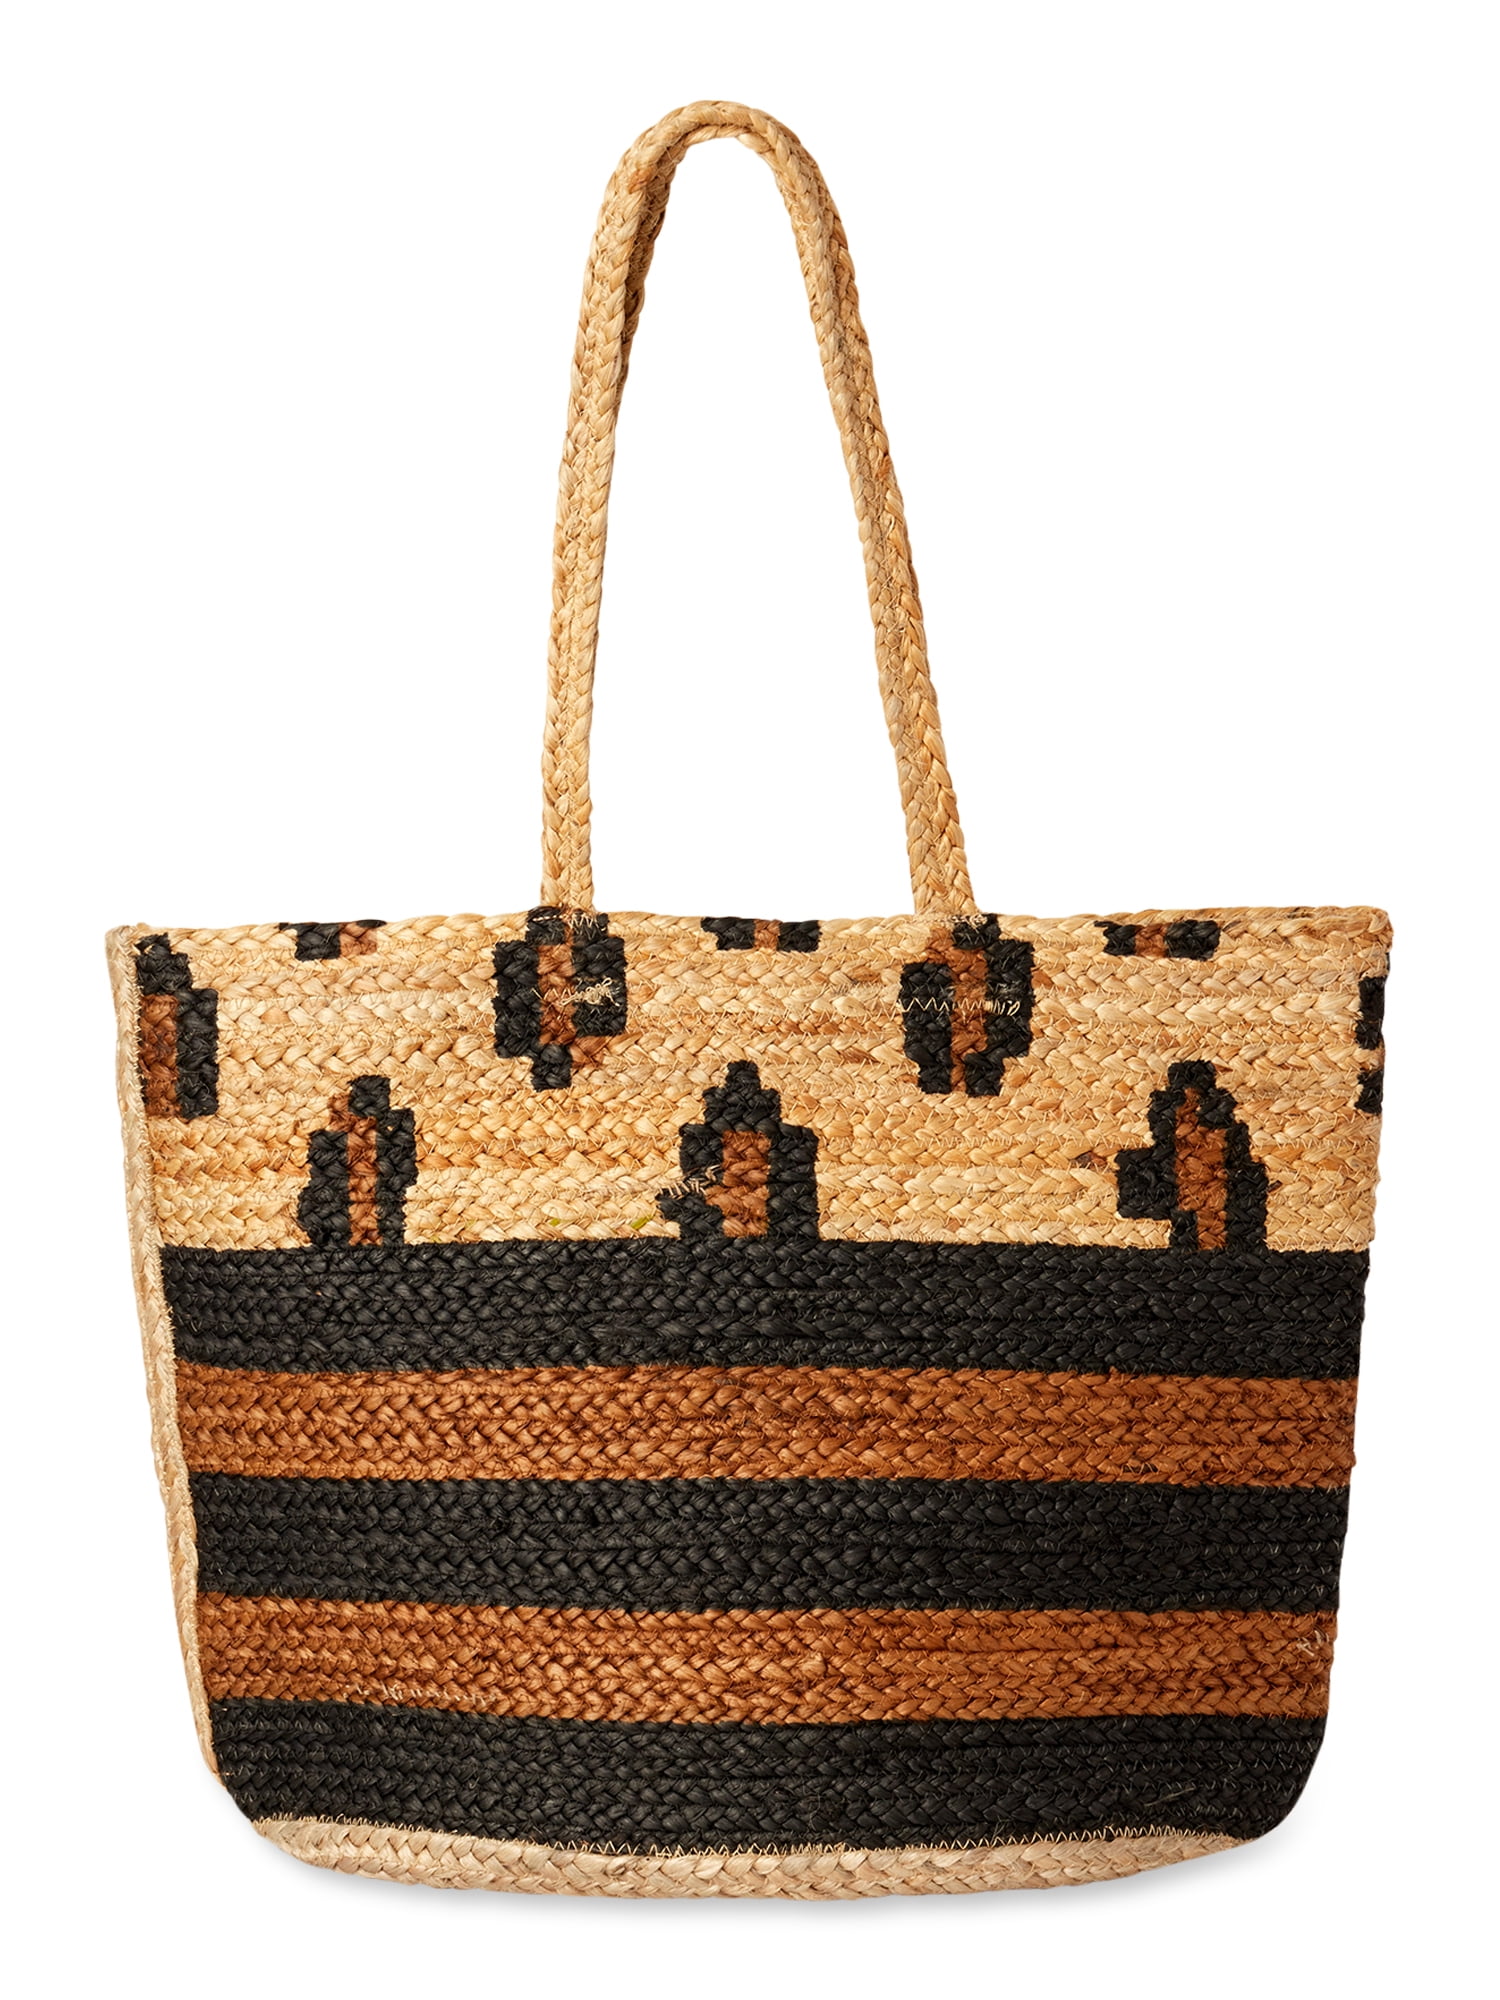 STRAW STUDIO'S LARGE STRAW WOVEN TOTE BAGS IN 2 DIFFERENT COLOURS BRAND NEW 